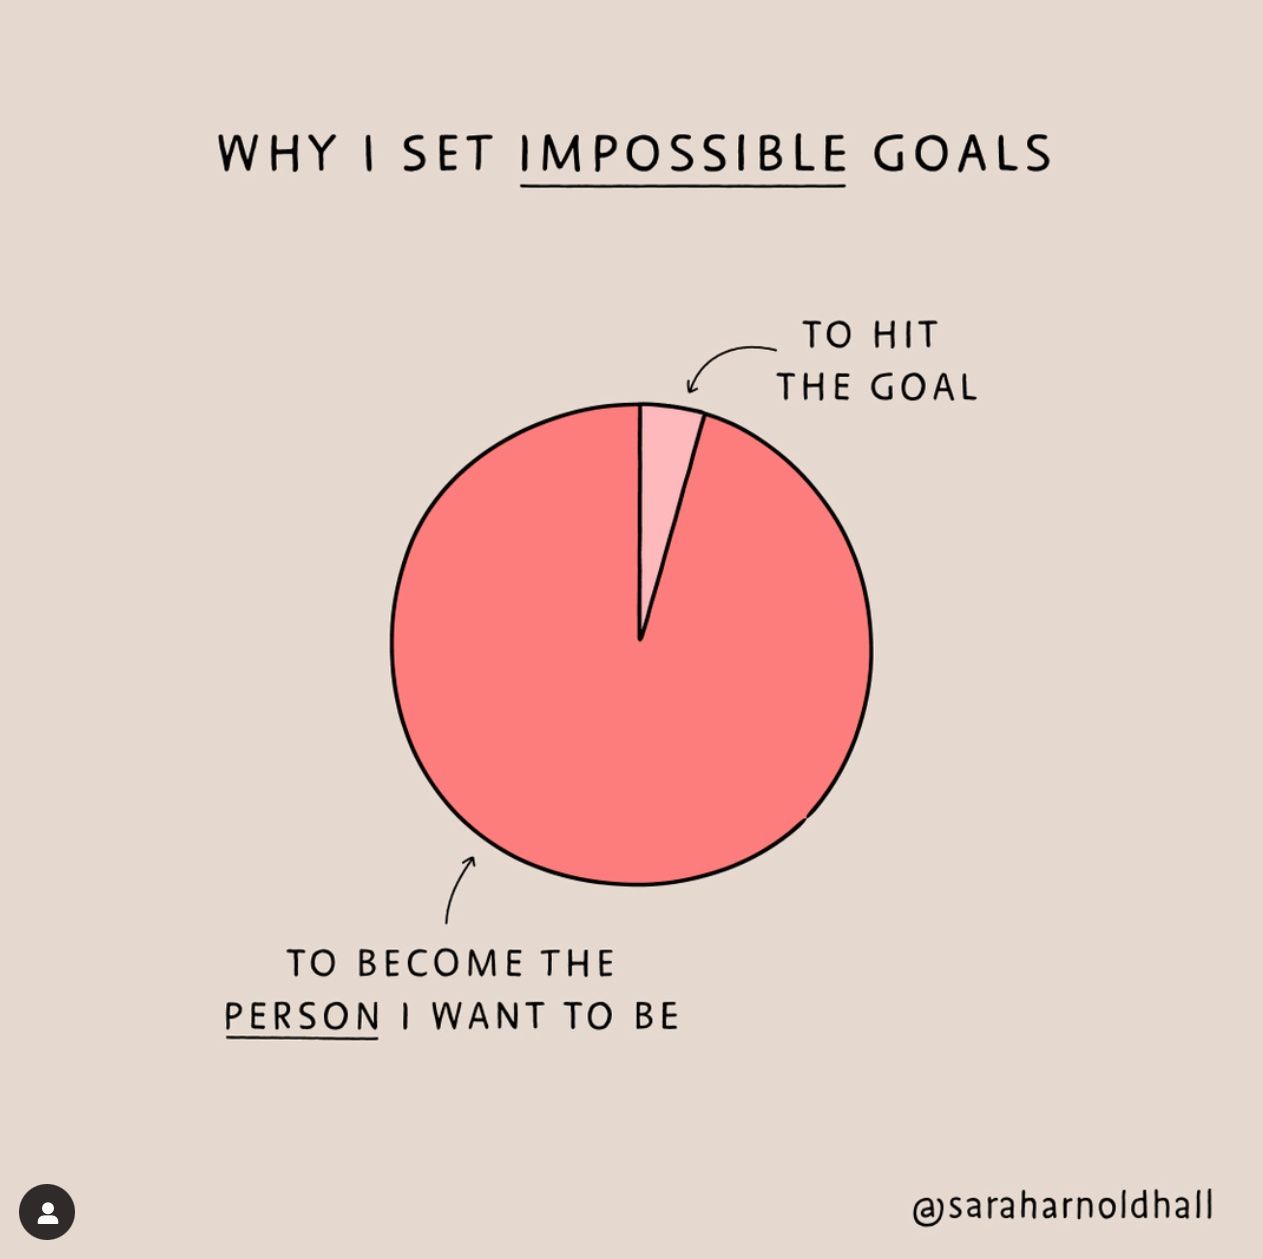 Pie chart to answer the question "Why I set impossible goals?", indicating that 95% of the time it's "to become the person I want to be"